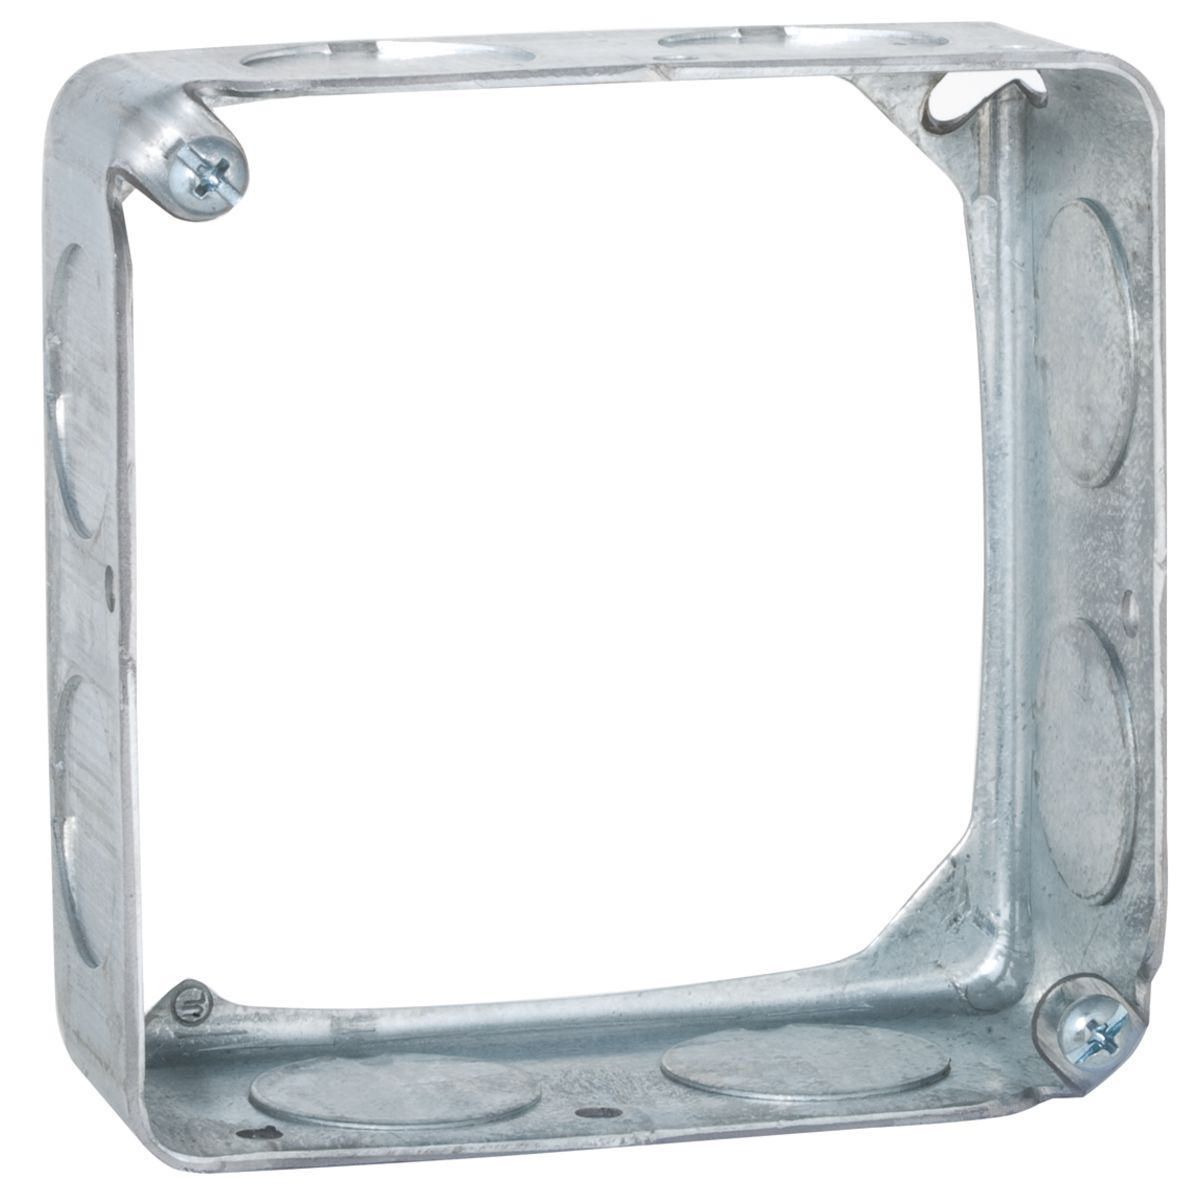 Raco 202 4" Square Extension Ring 1-1/2" Thick 